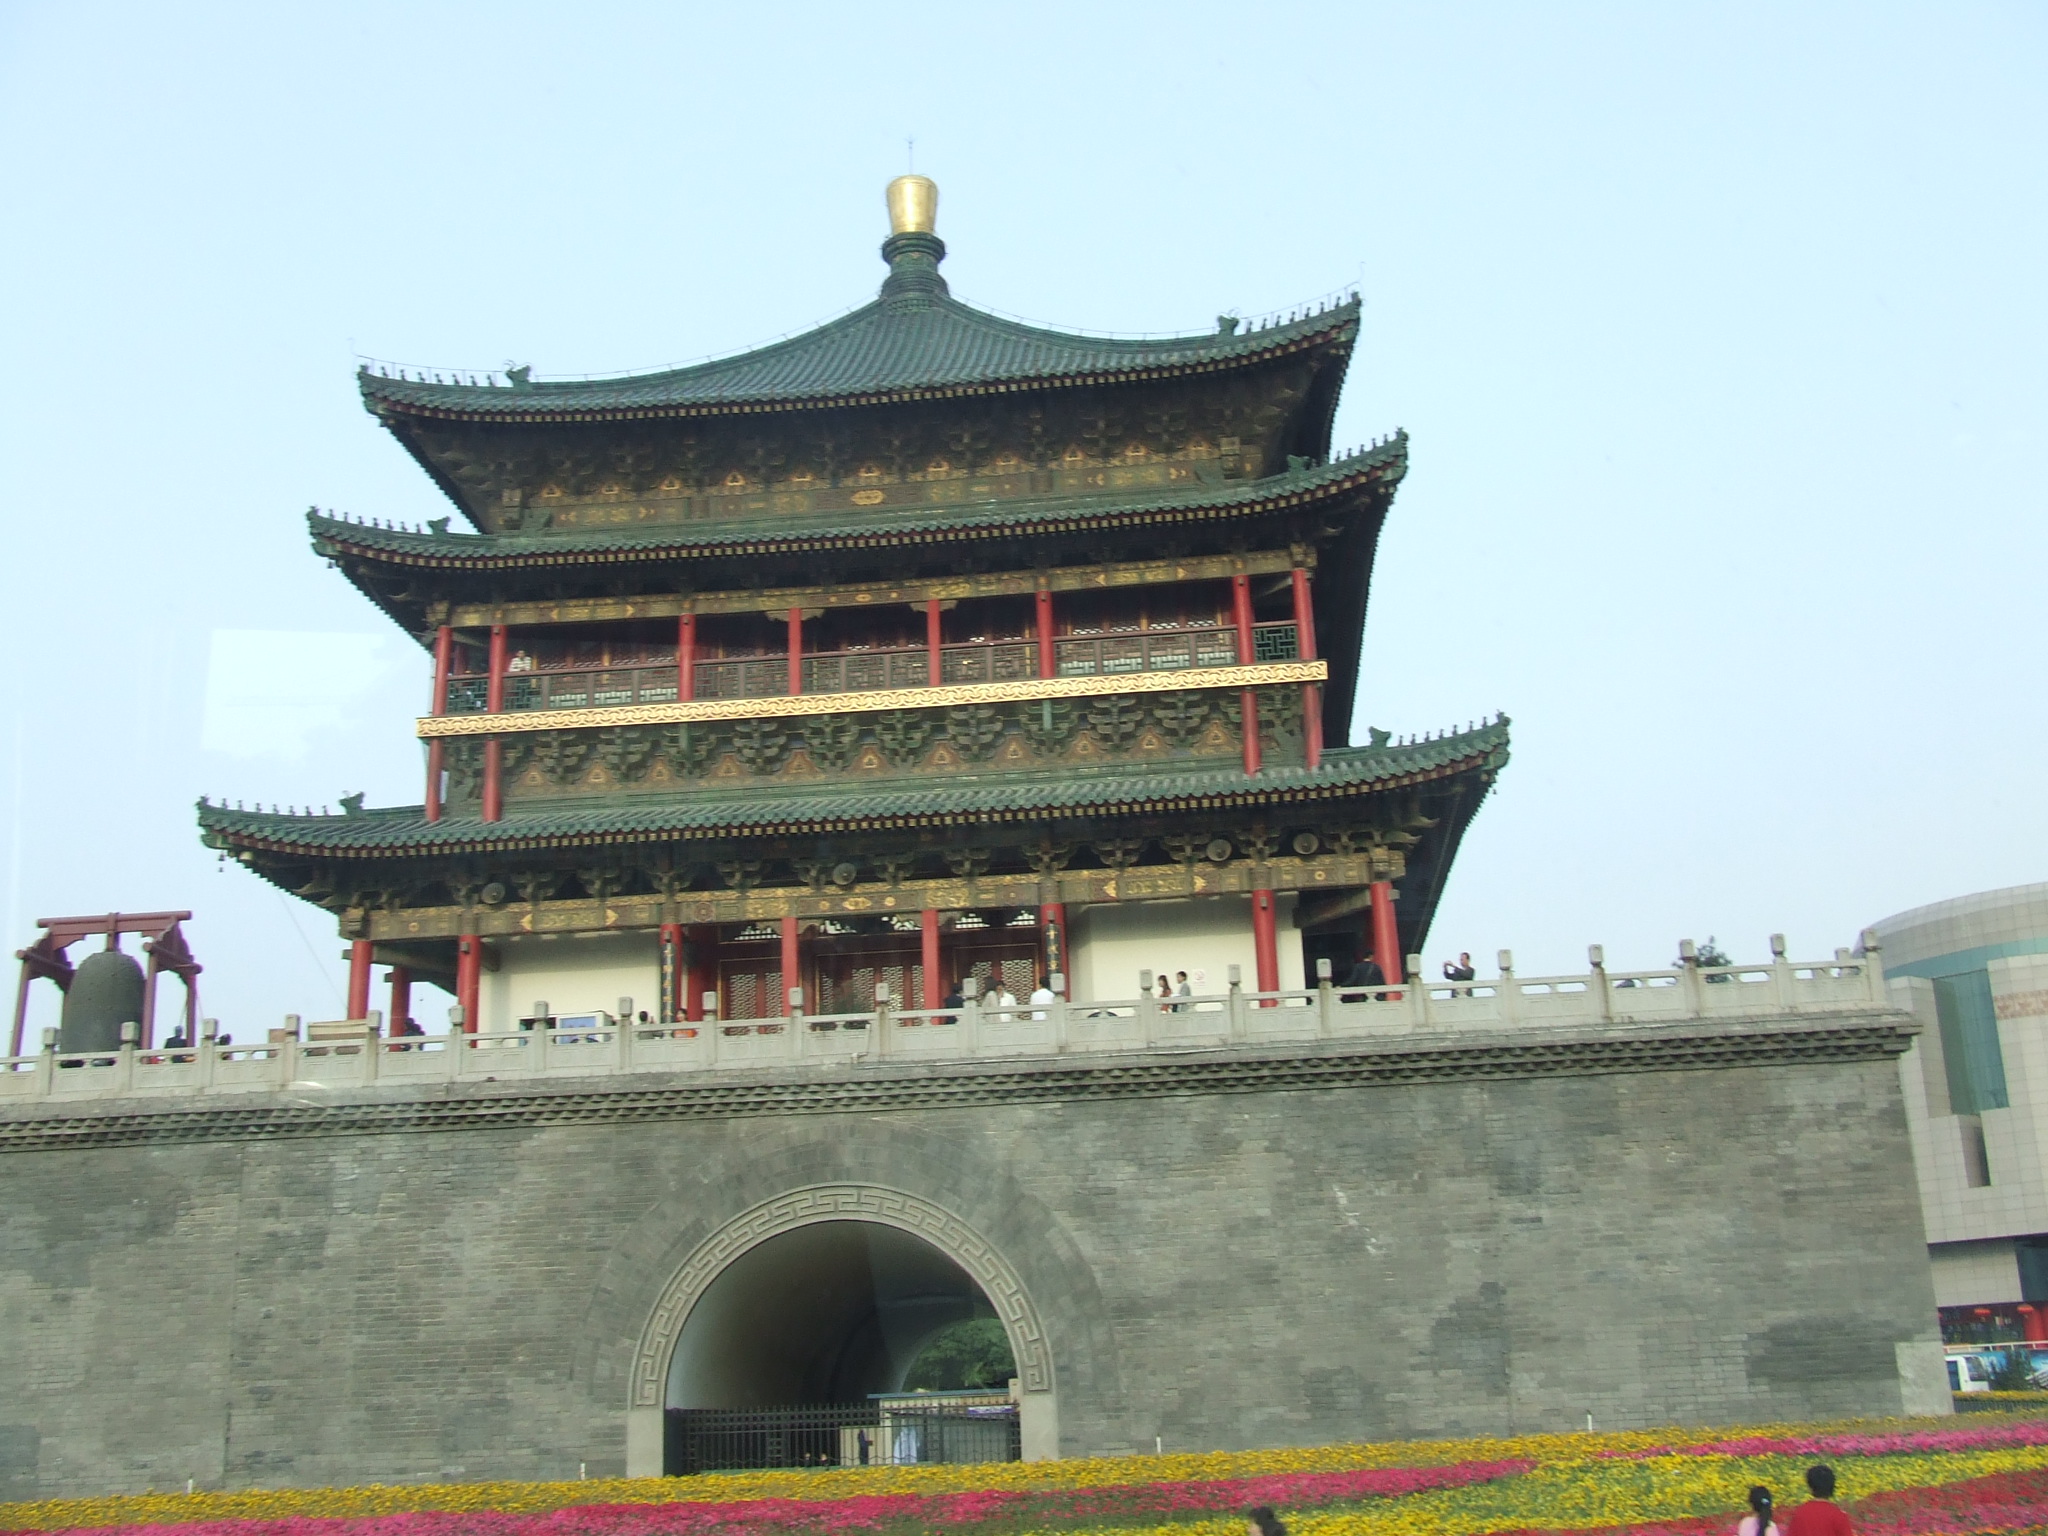 a large tower with multiple red and white decorations